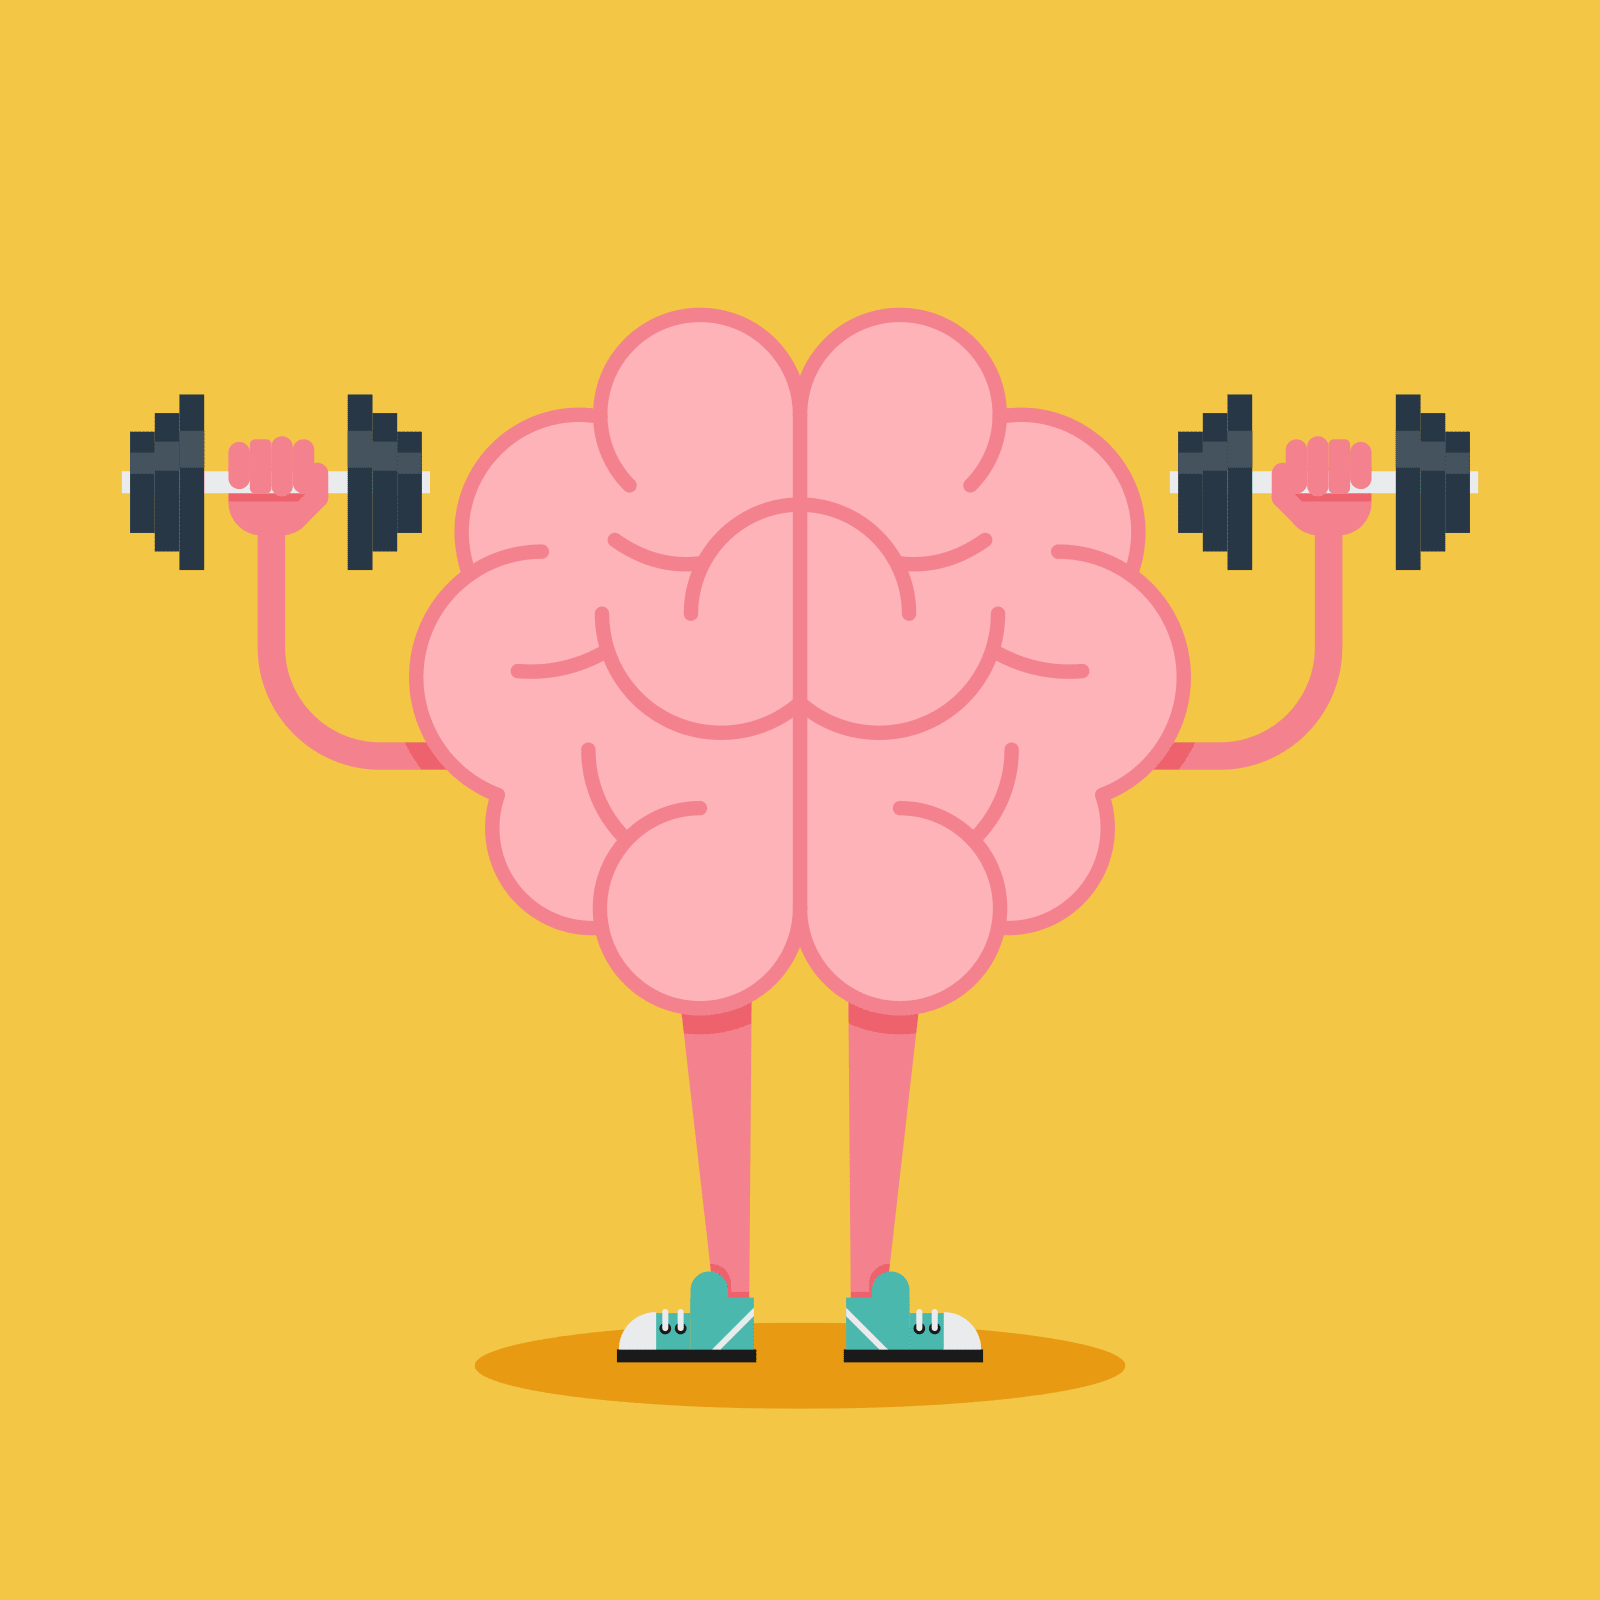 Brain with arms and legs lifting dumbell weights